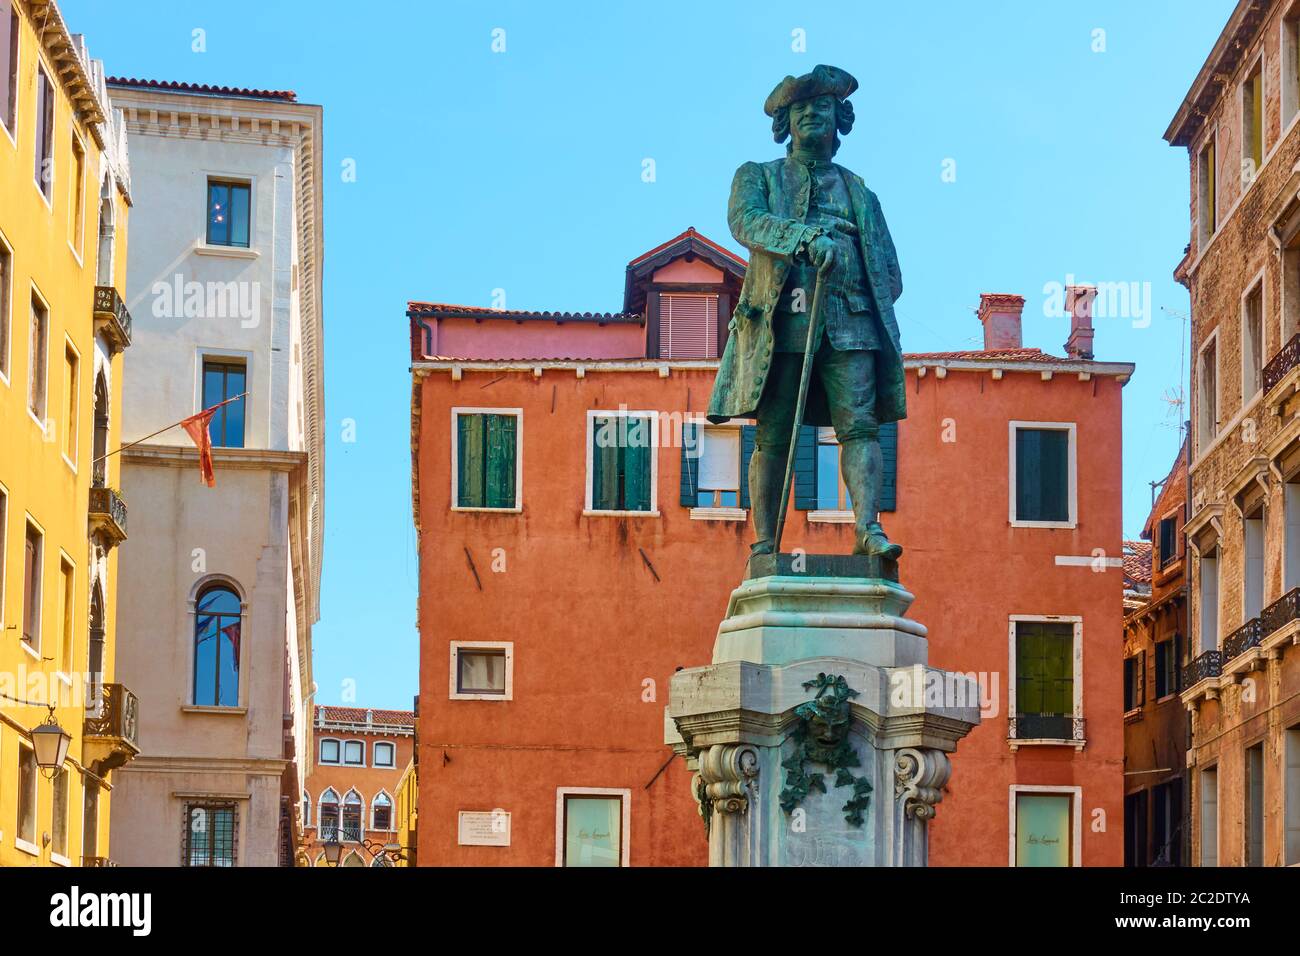 Monument in honour of Italian playwright and librettist Carlo Goldoni. The monument was erected in Campo San Bartolomeo in 1883 in Venice, Italy. Stock Photo